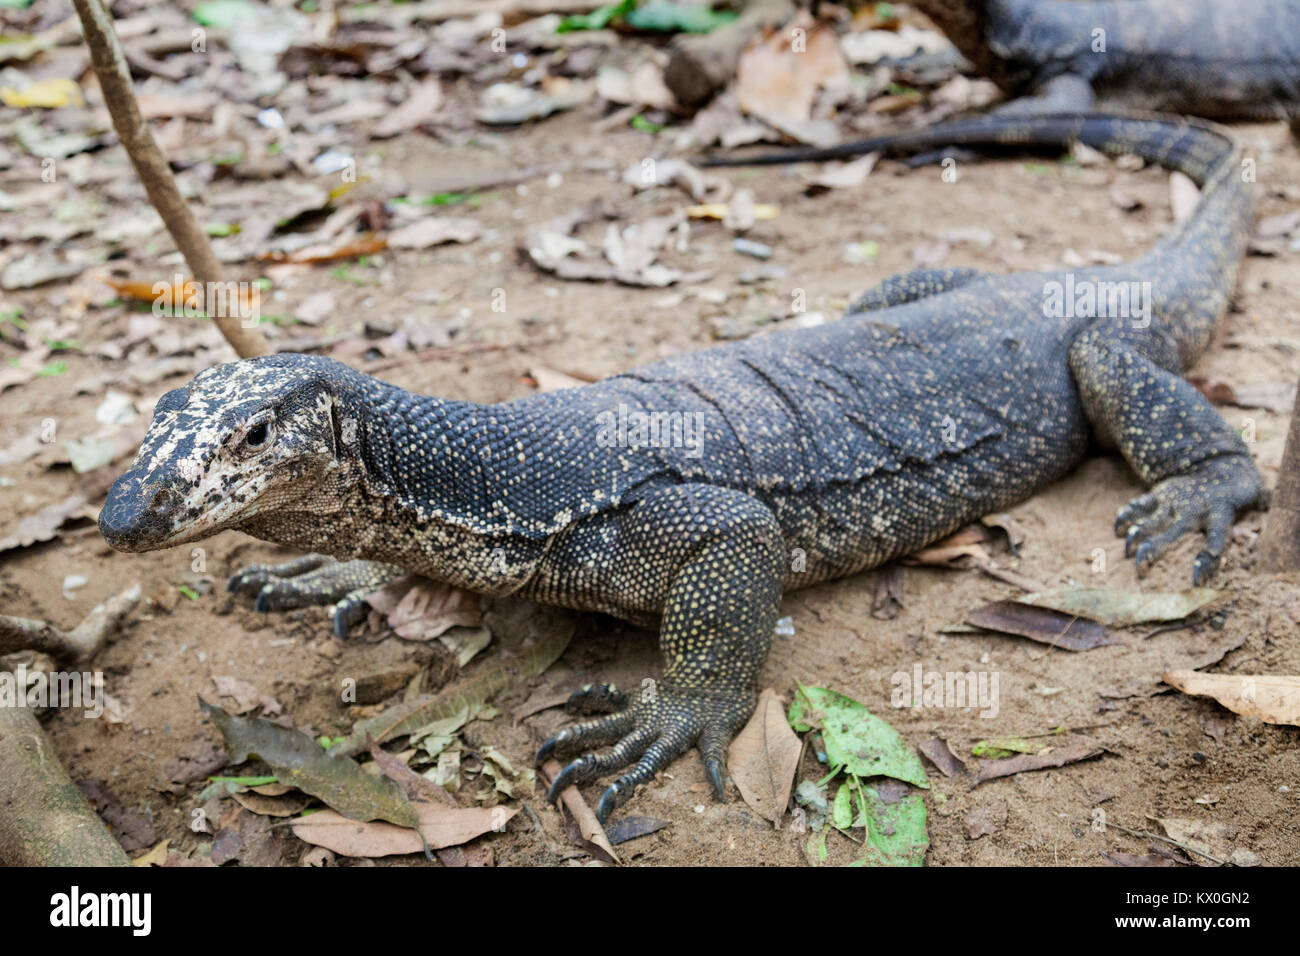 The monitor lizard from Palawan, Philippines Stock Photo